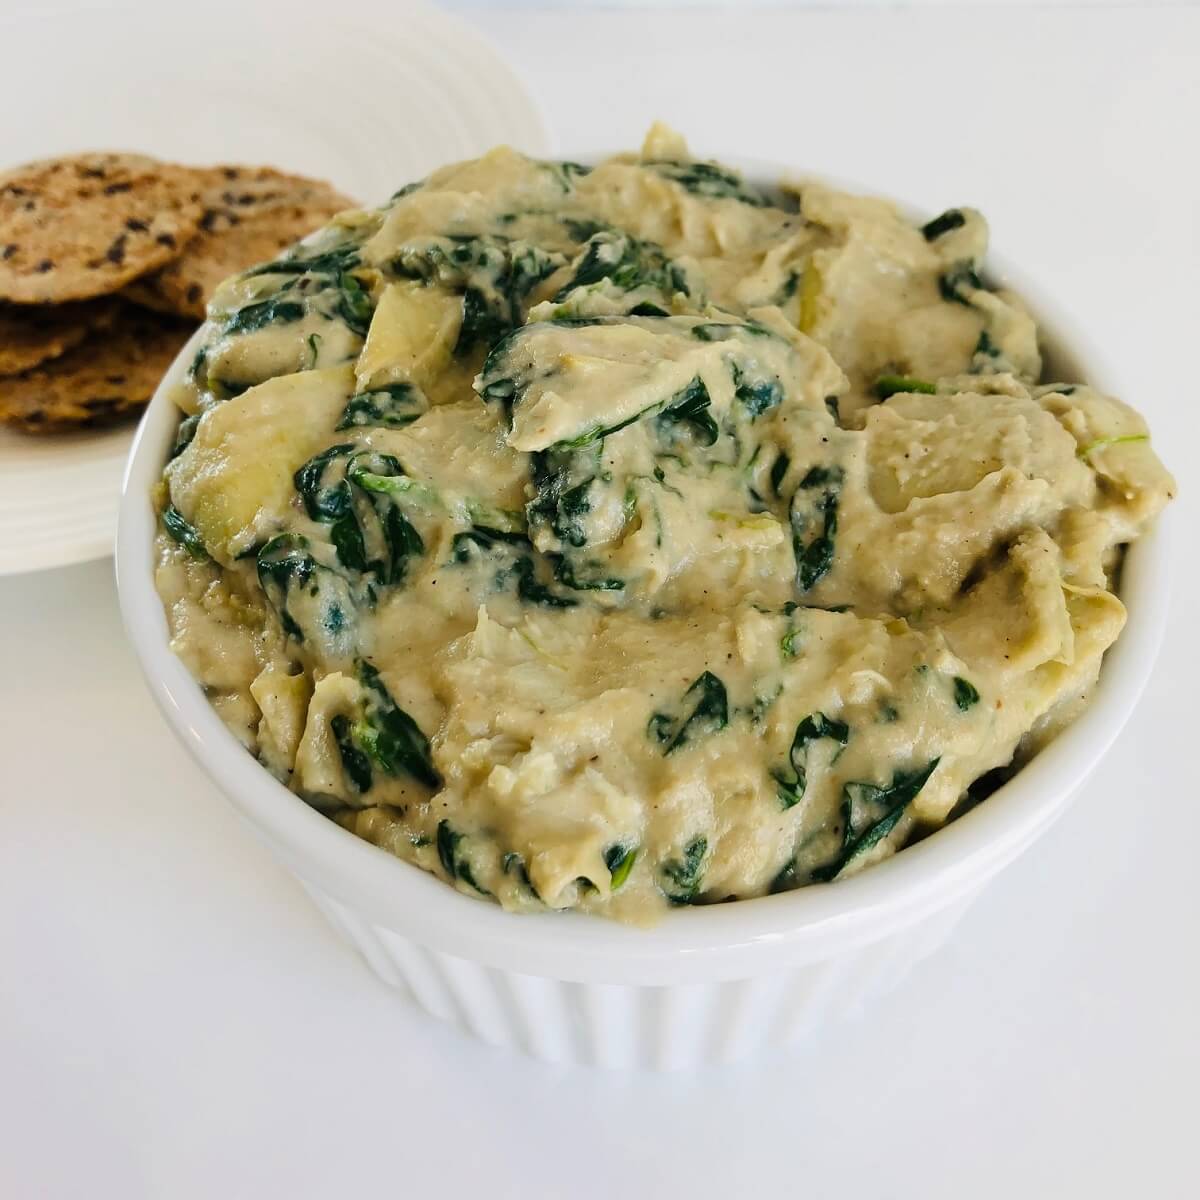 A bowl of gluten-free dairy-free spinach artichoke dip next to a plate of crackers.